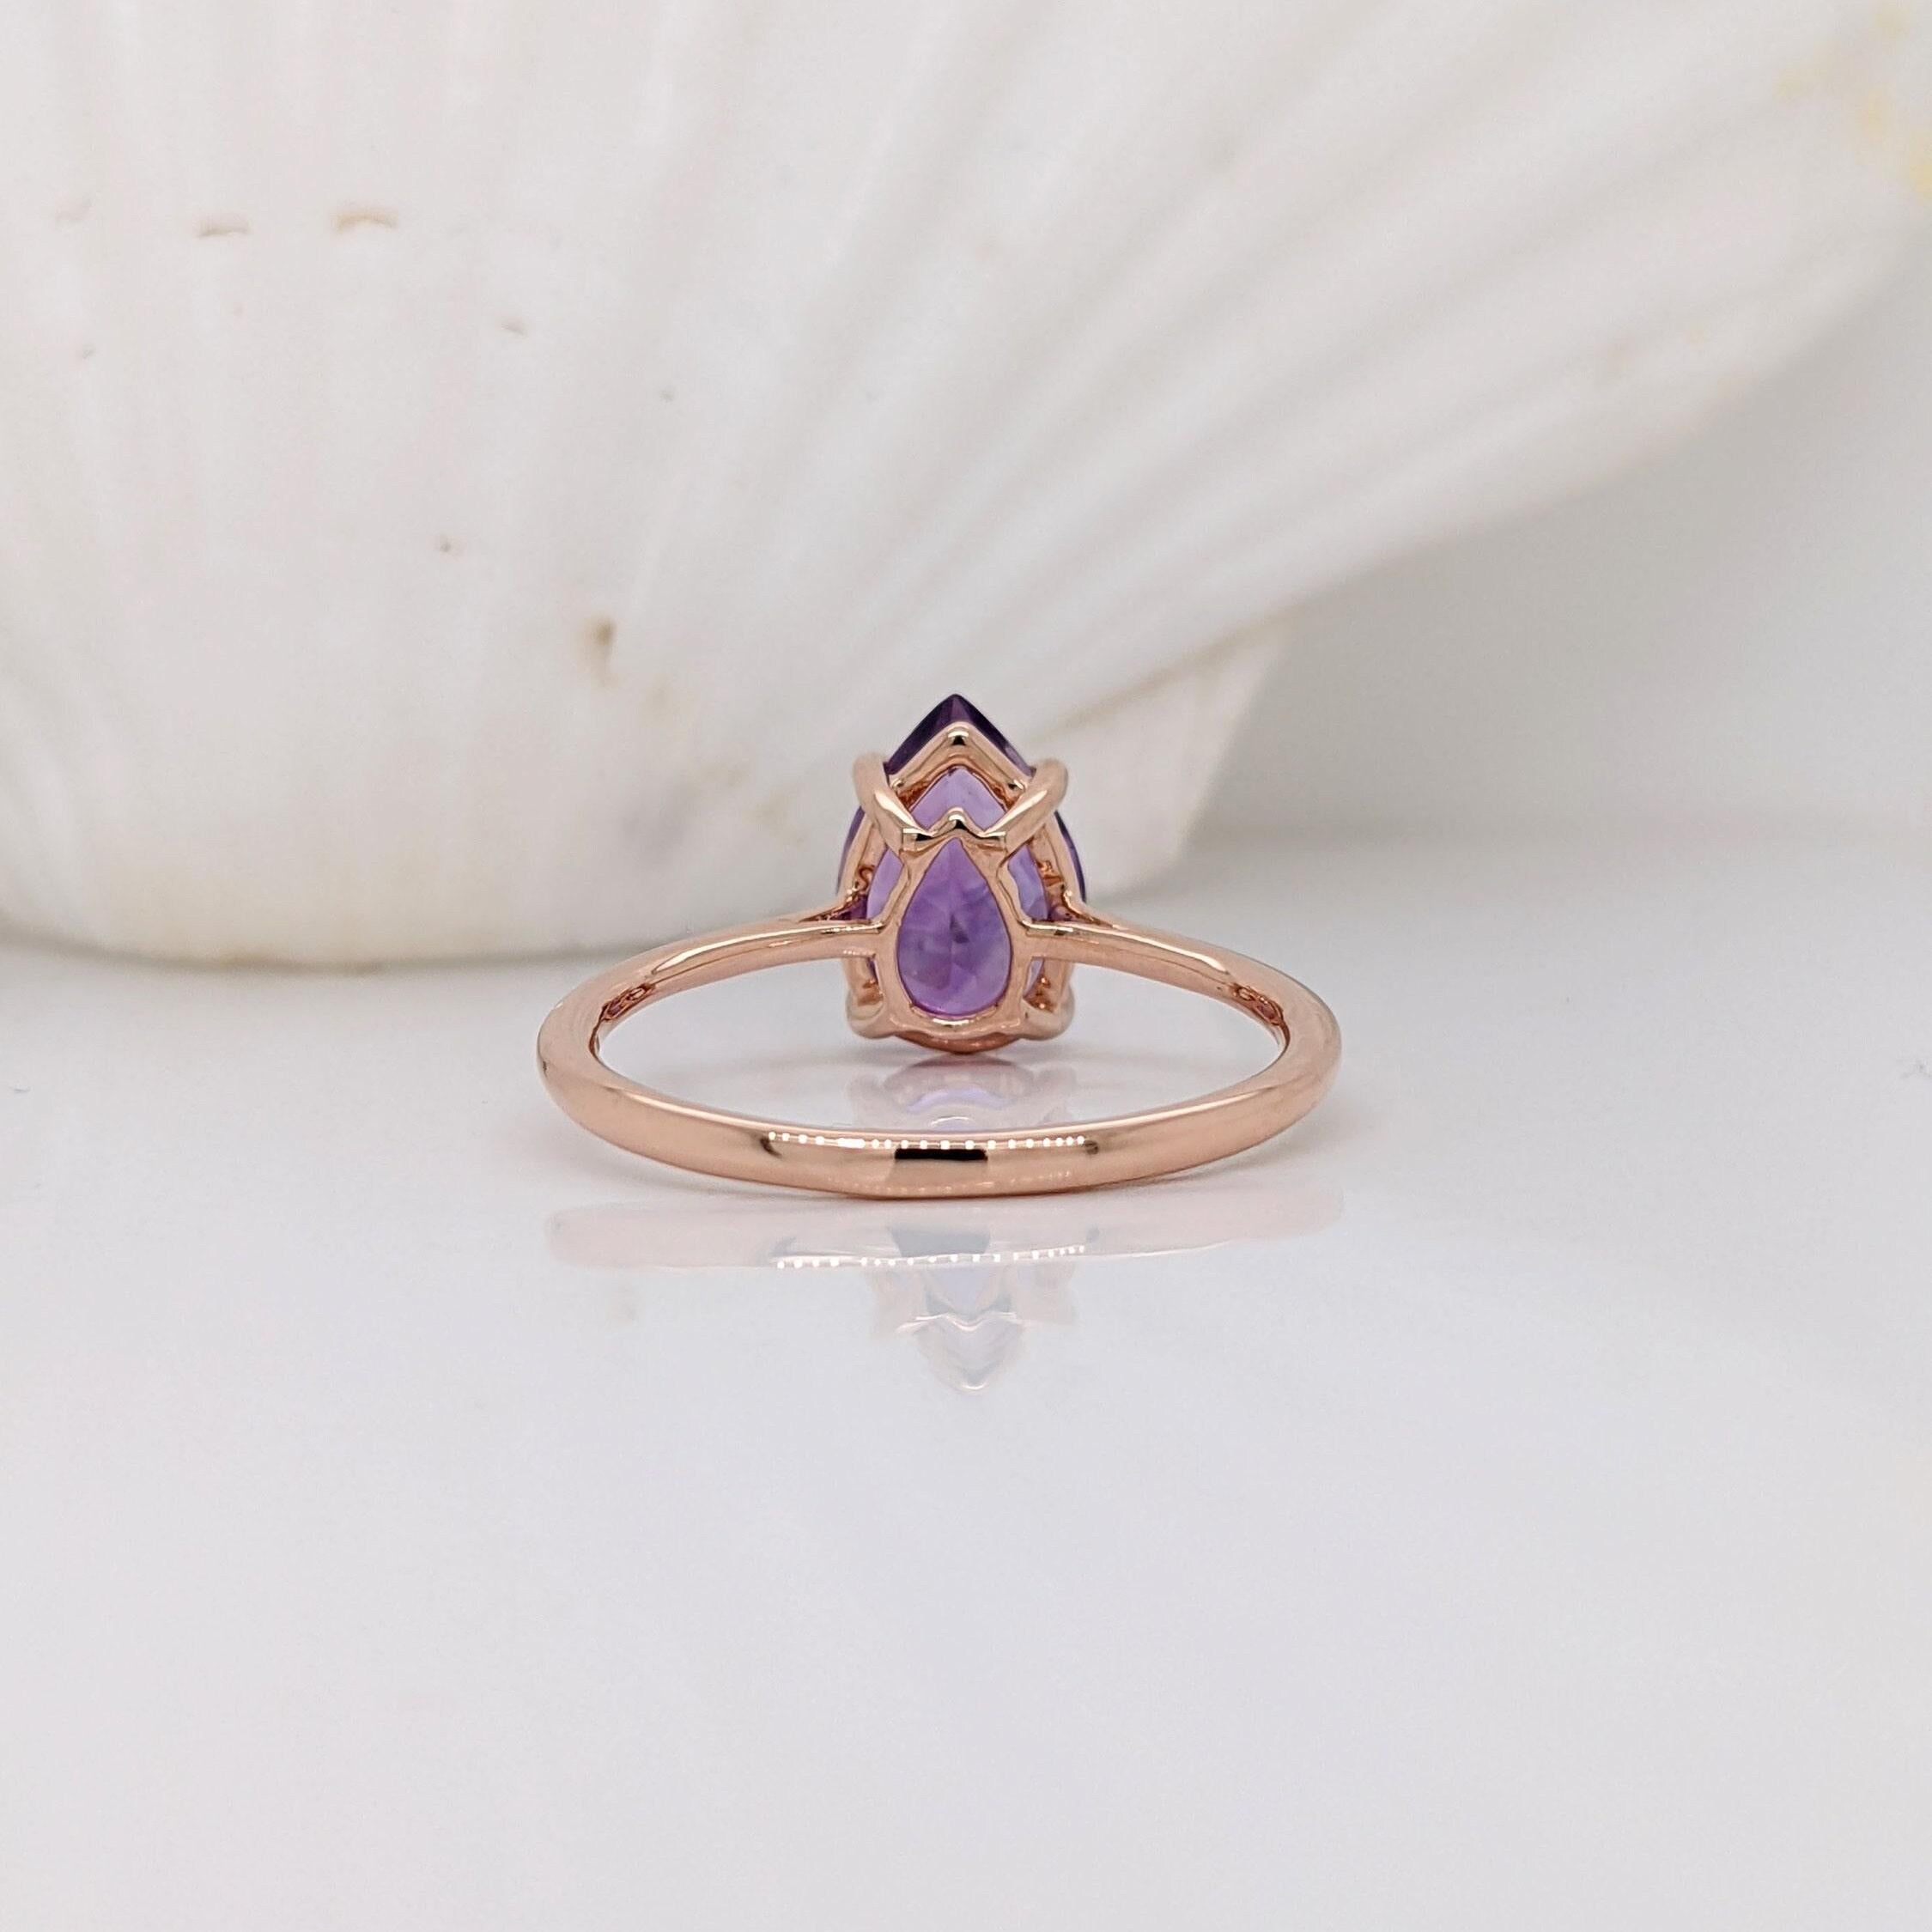 Pear Cut Purple Amethyst in a Solid 14k Rose Gold Solitaire Setting  Pear Shape 10x7mm 